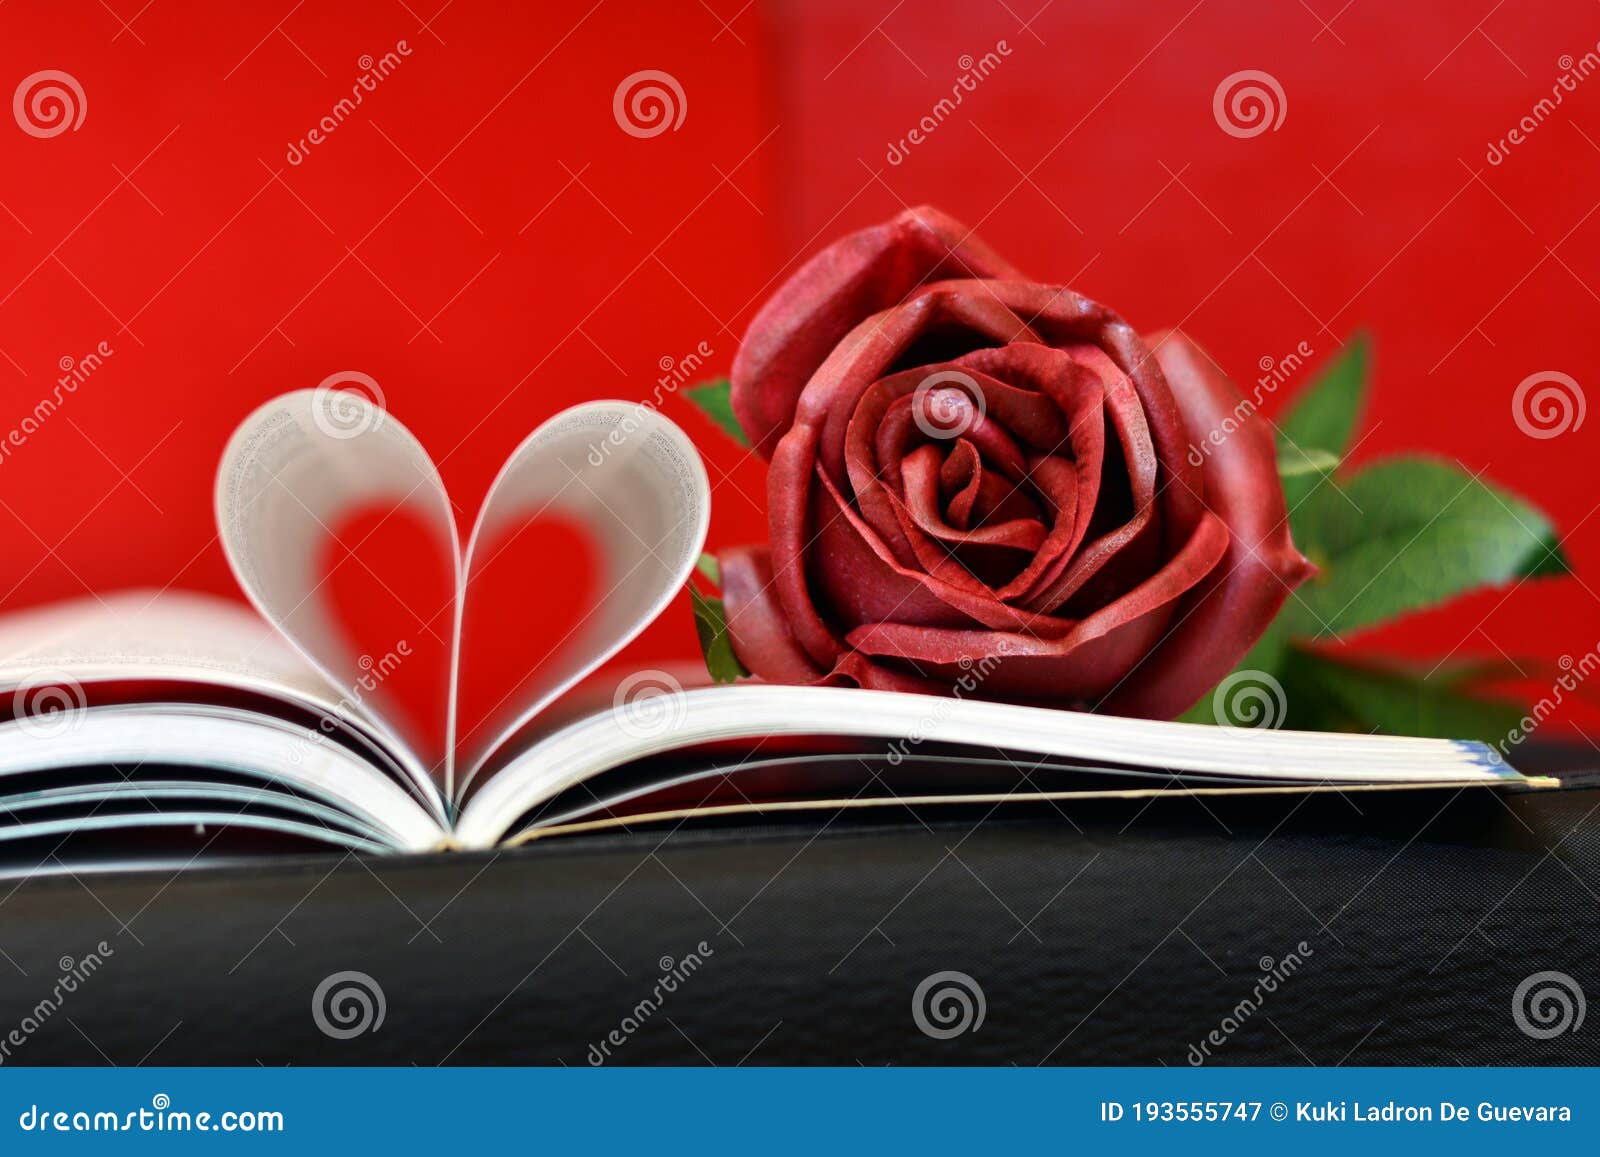 open book with curved pages in a heart 